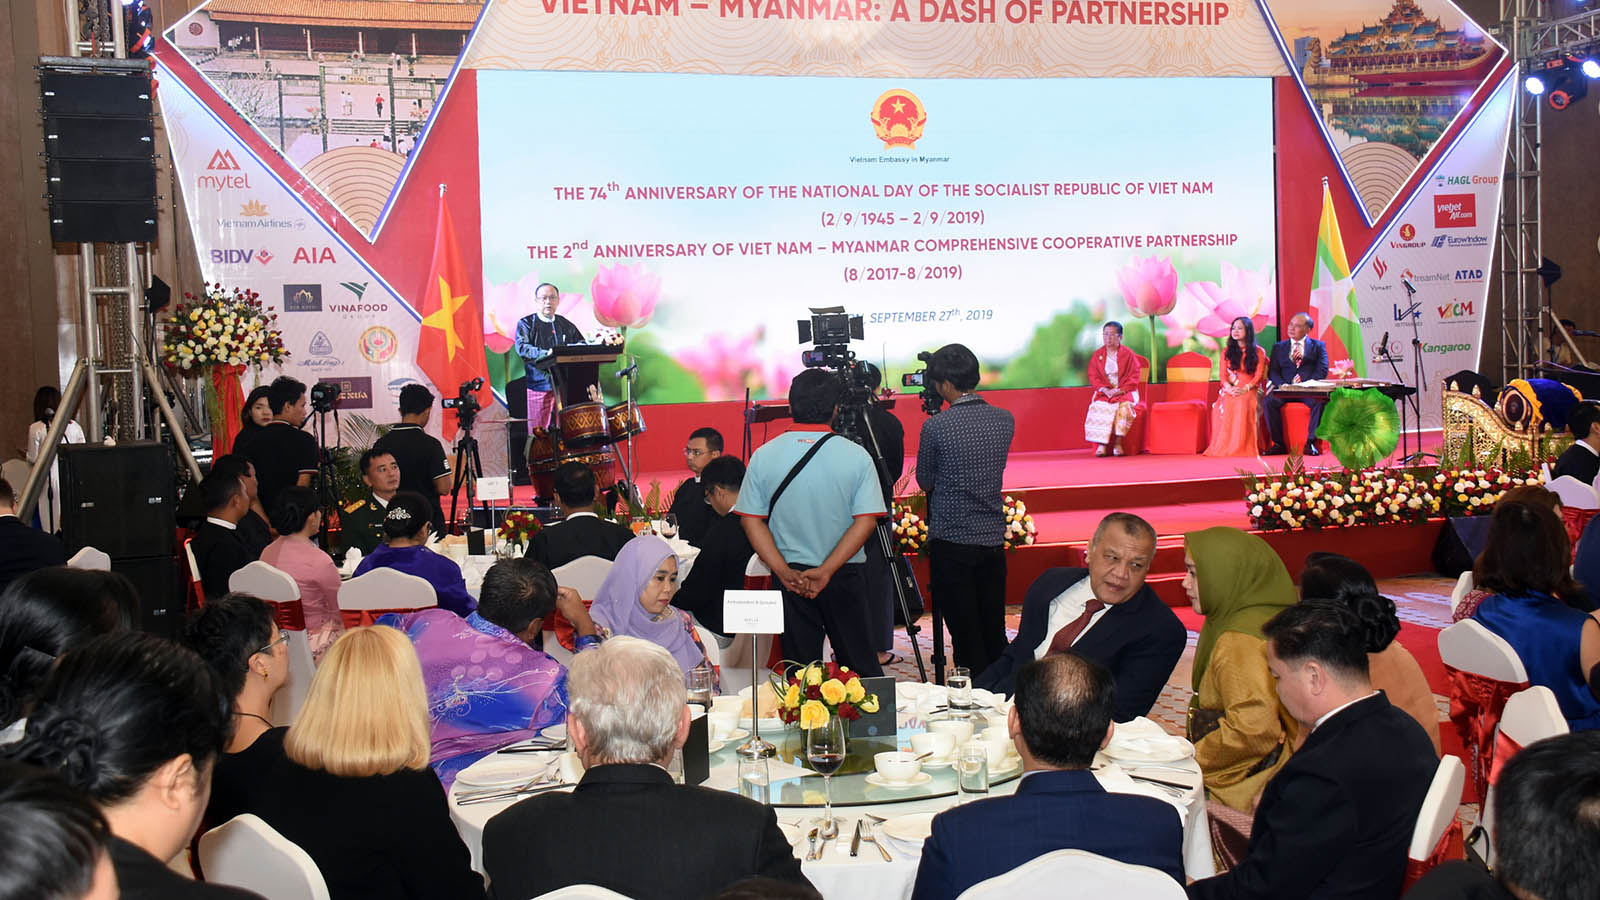 Viet Nam’s 74th National Day Celebrated In Yangon - Global New Light Of ...